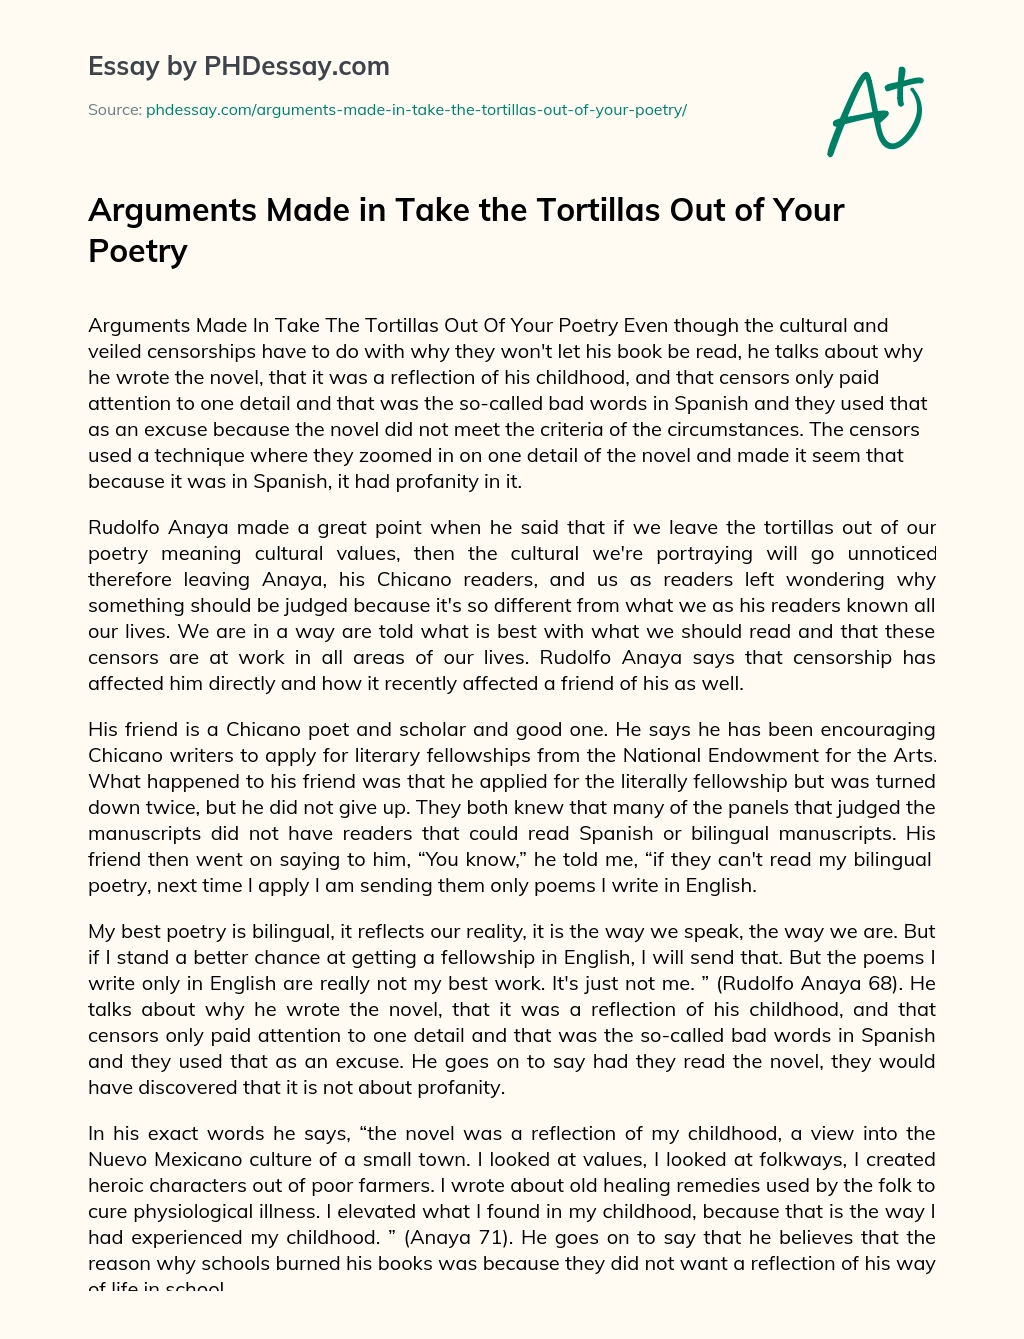 Arguments Made in Take the Tortillas Out of Your Poetry essay